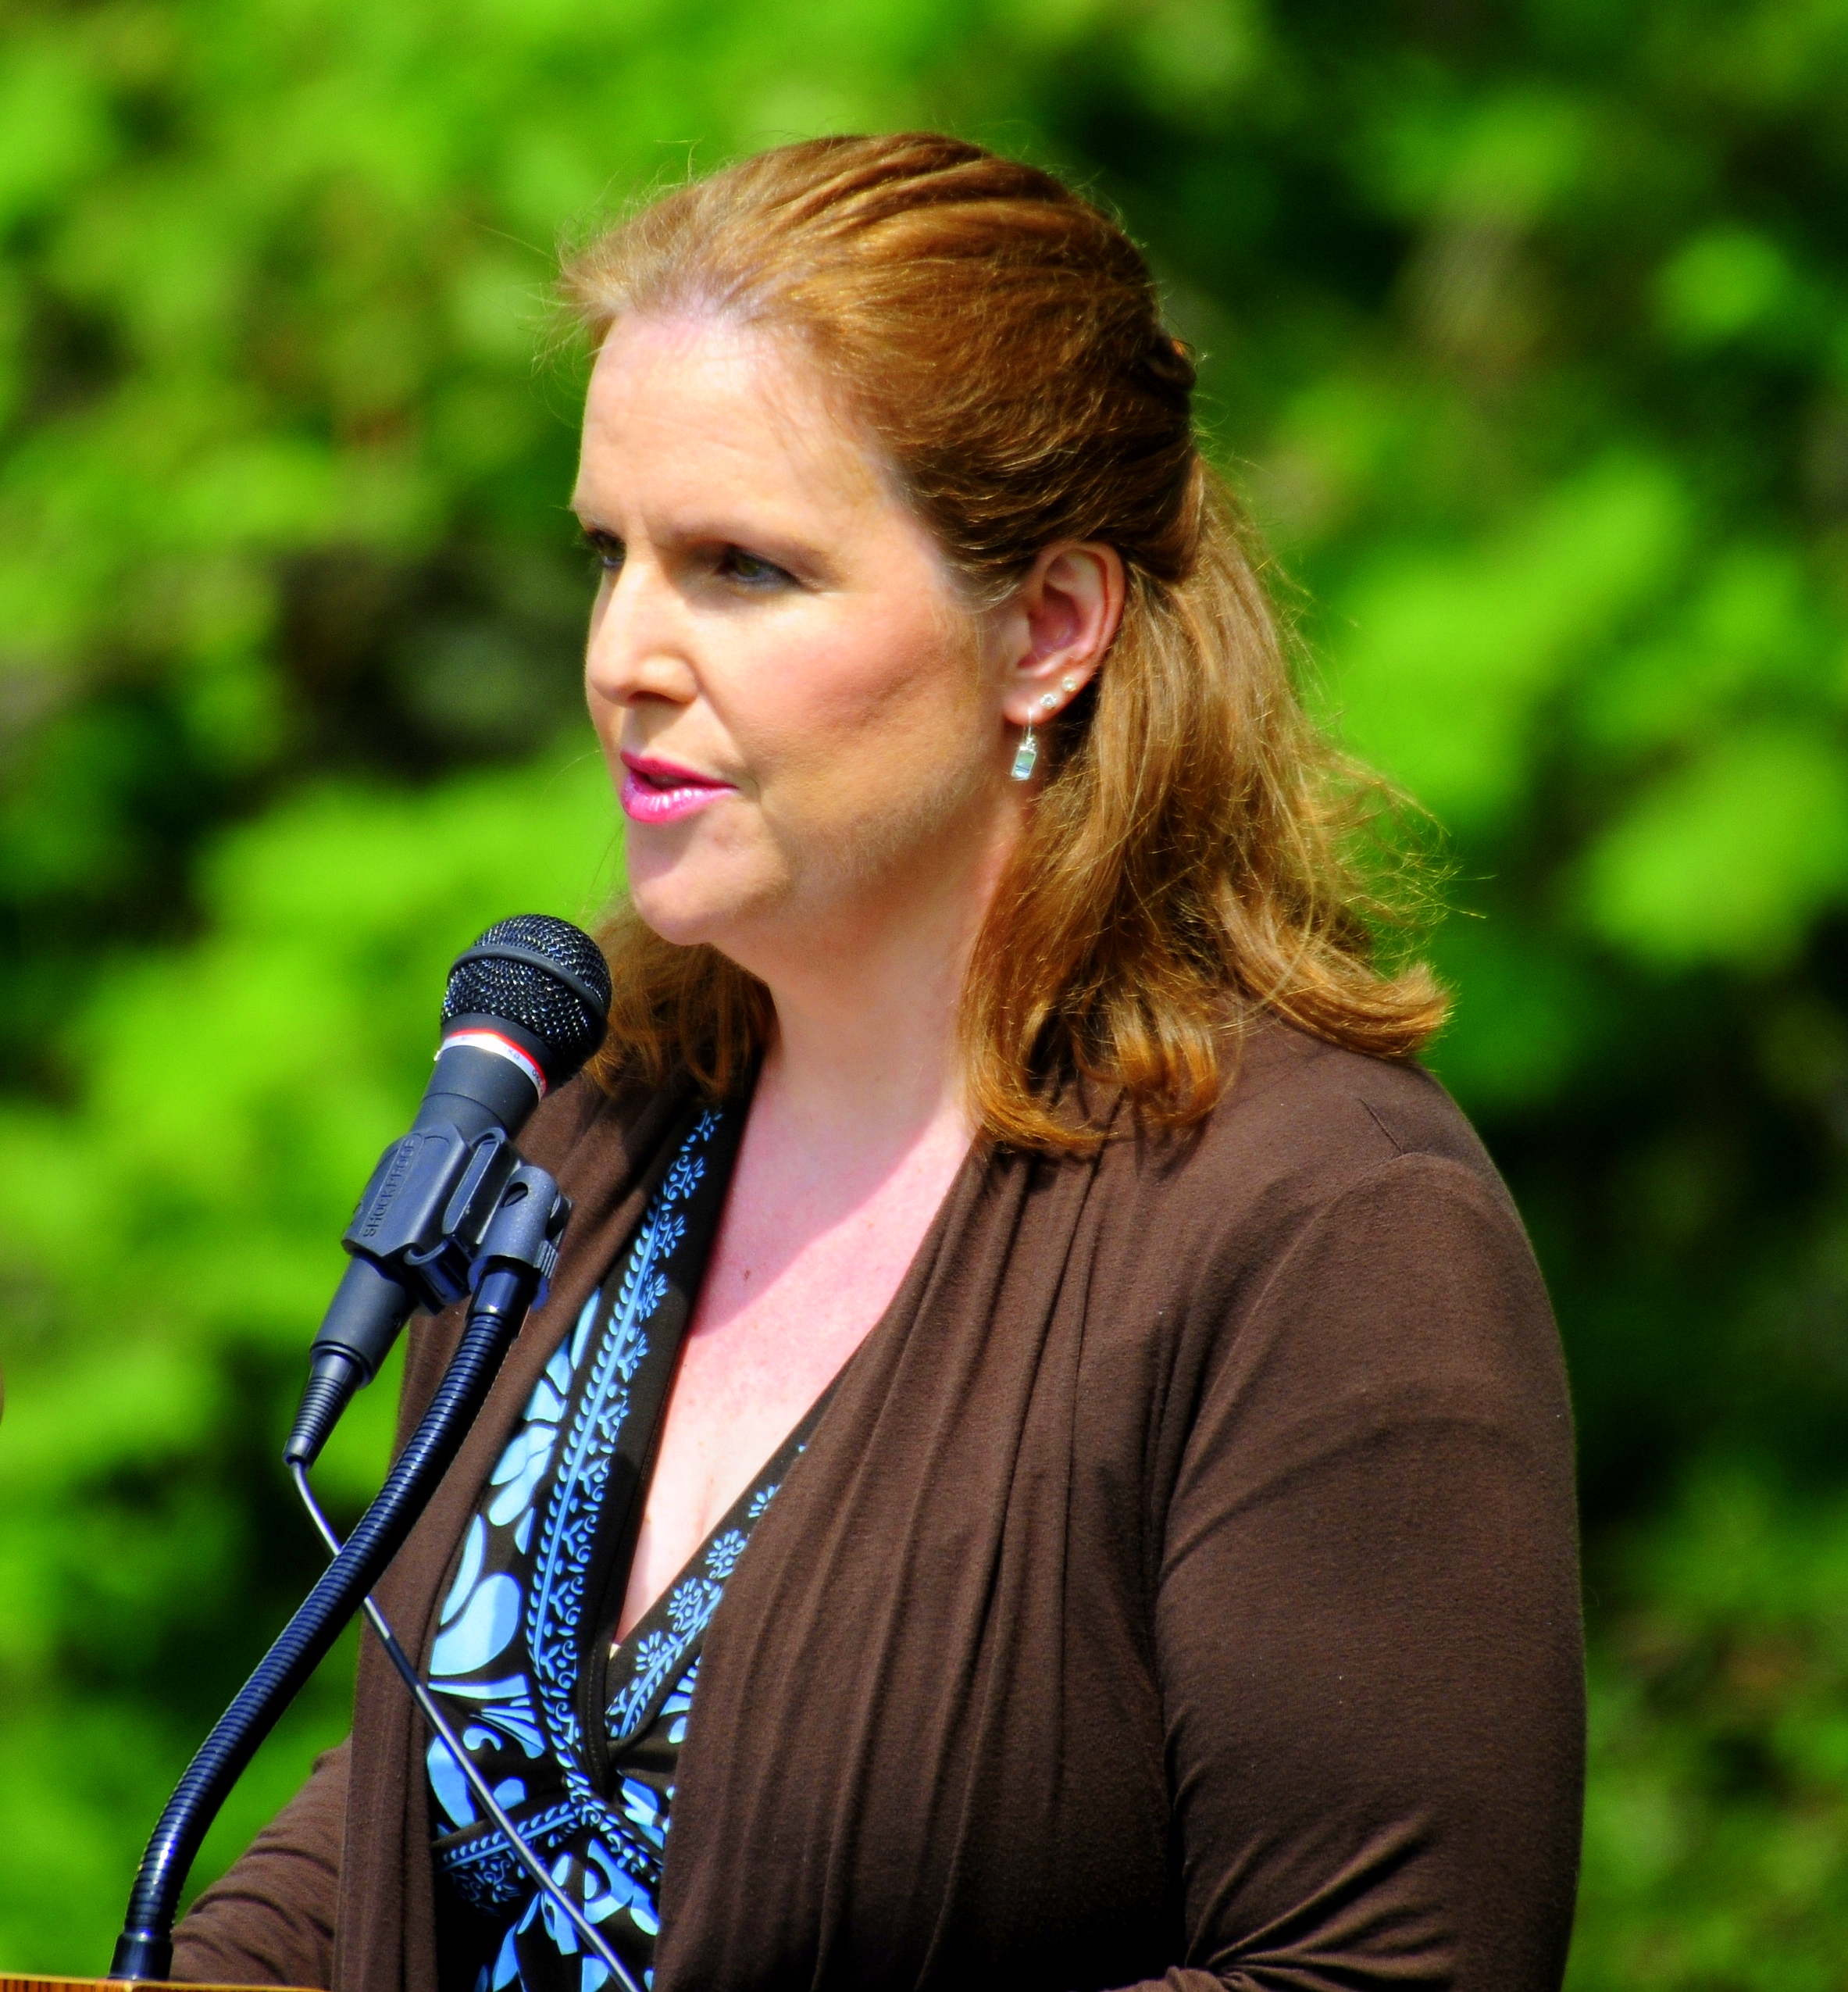 Keynote speaker at the Law Enforcement Memorial Day Service on May 13, 2011 in St. Joseph, Michigan